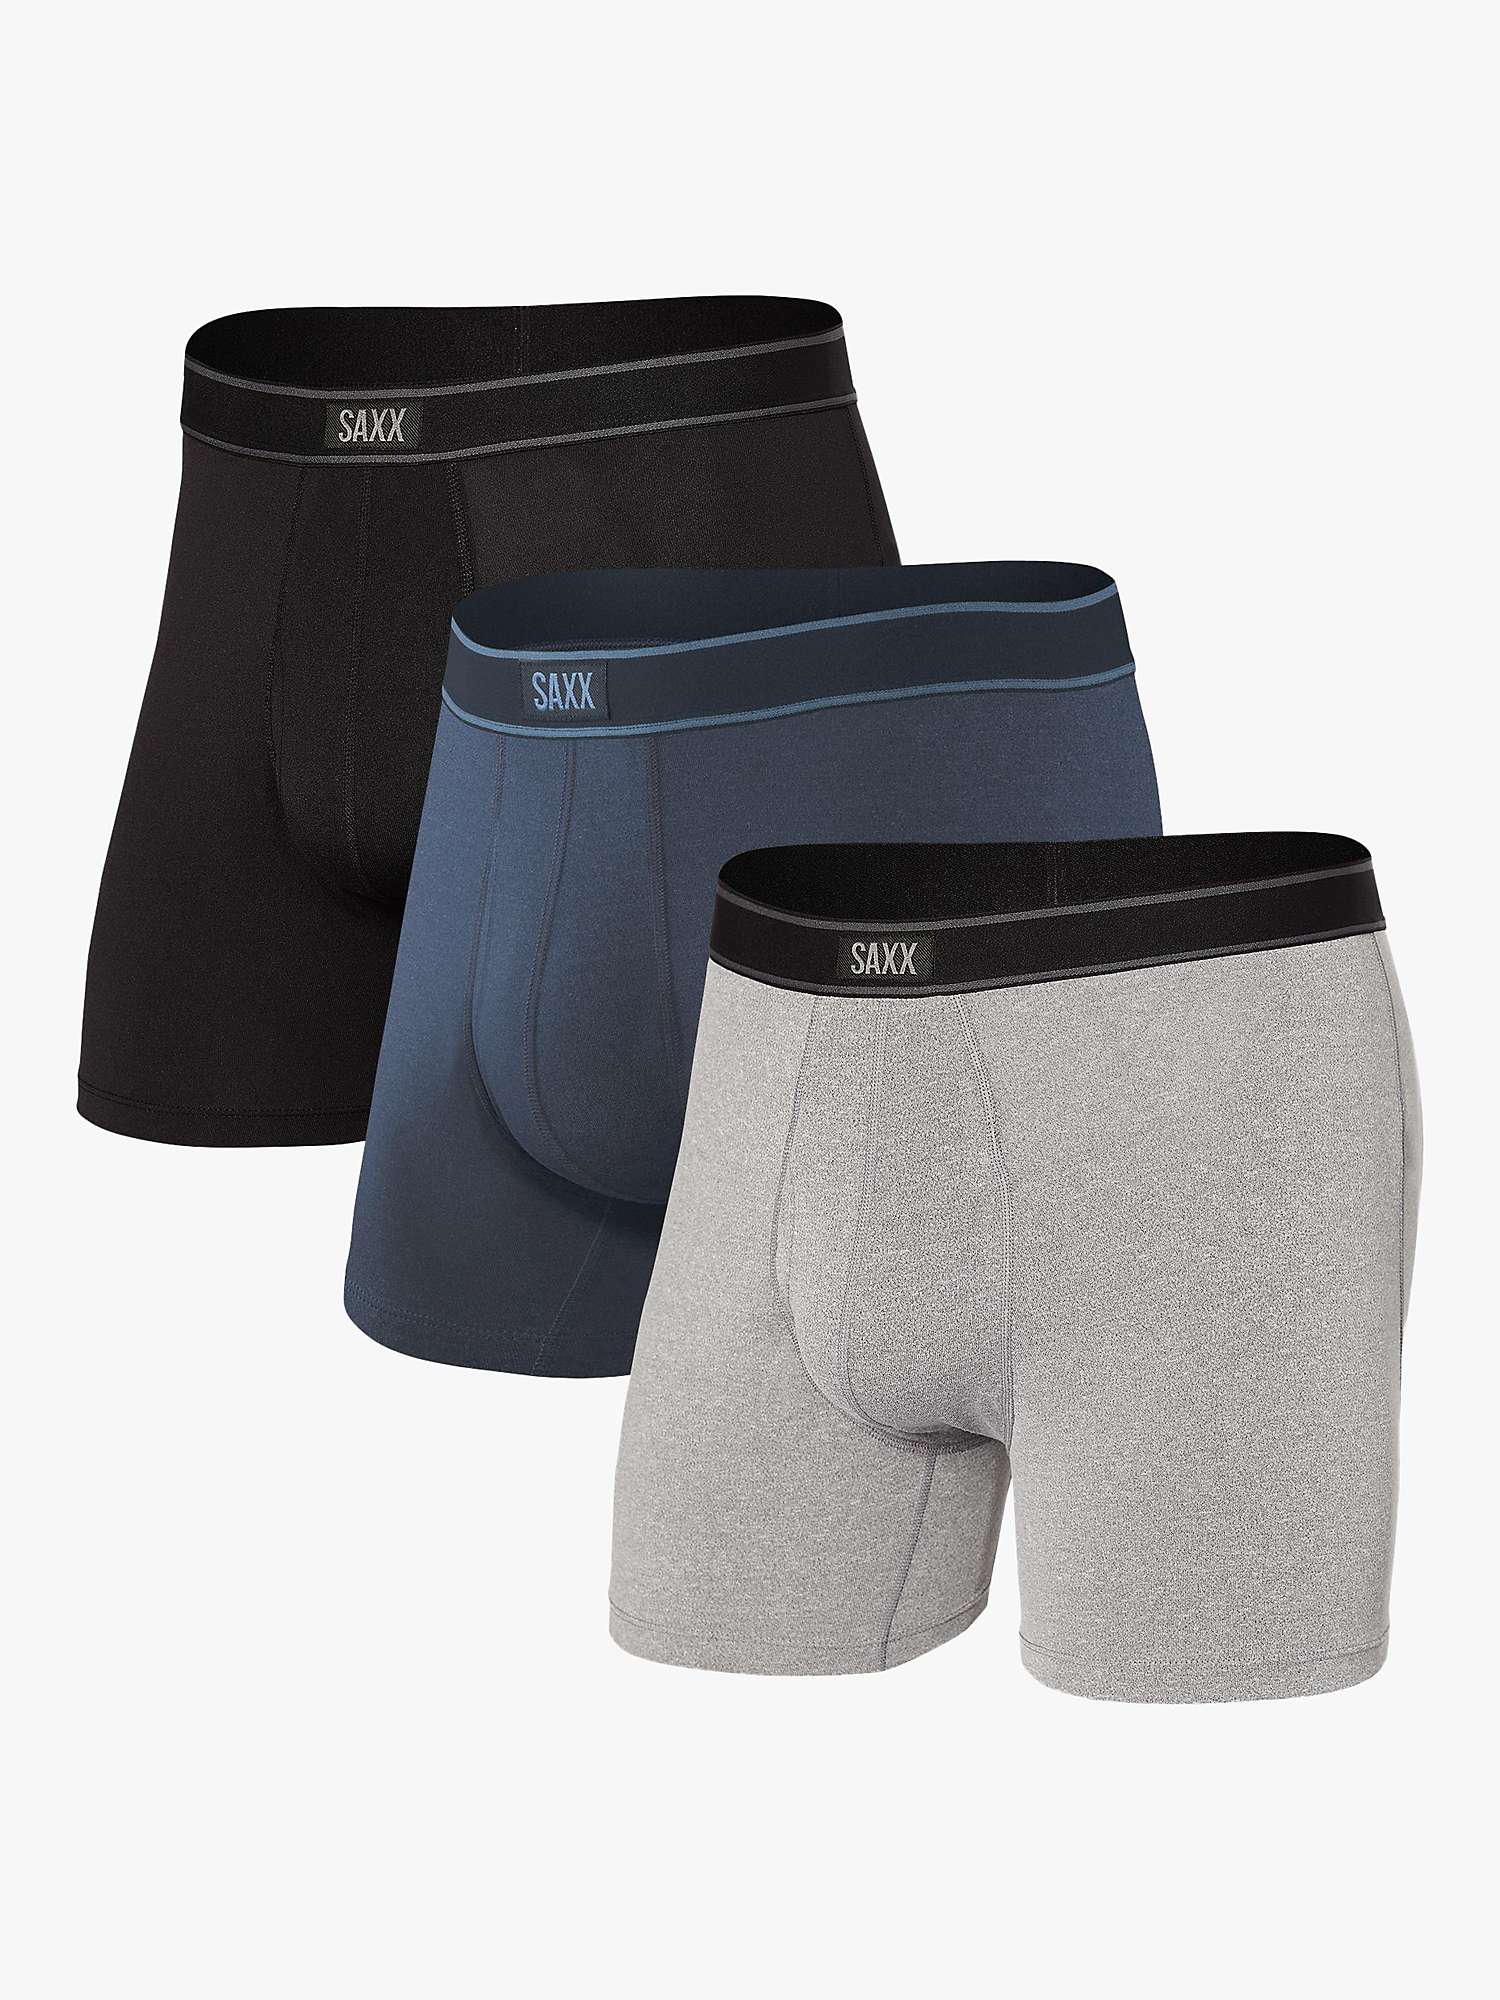 SAXX Daytripper Trunks, Pack of 3, Black/Grey/Navy at John Lewis & Partners